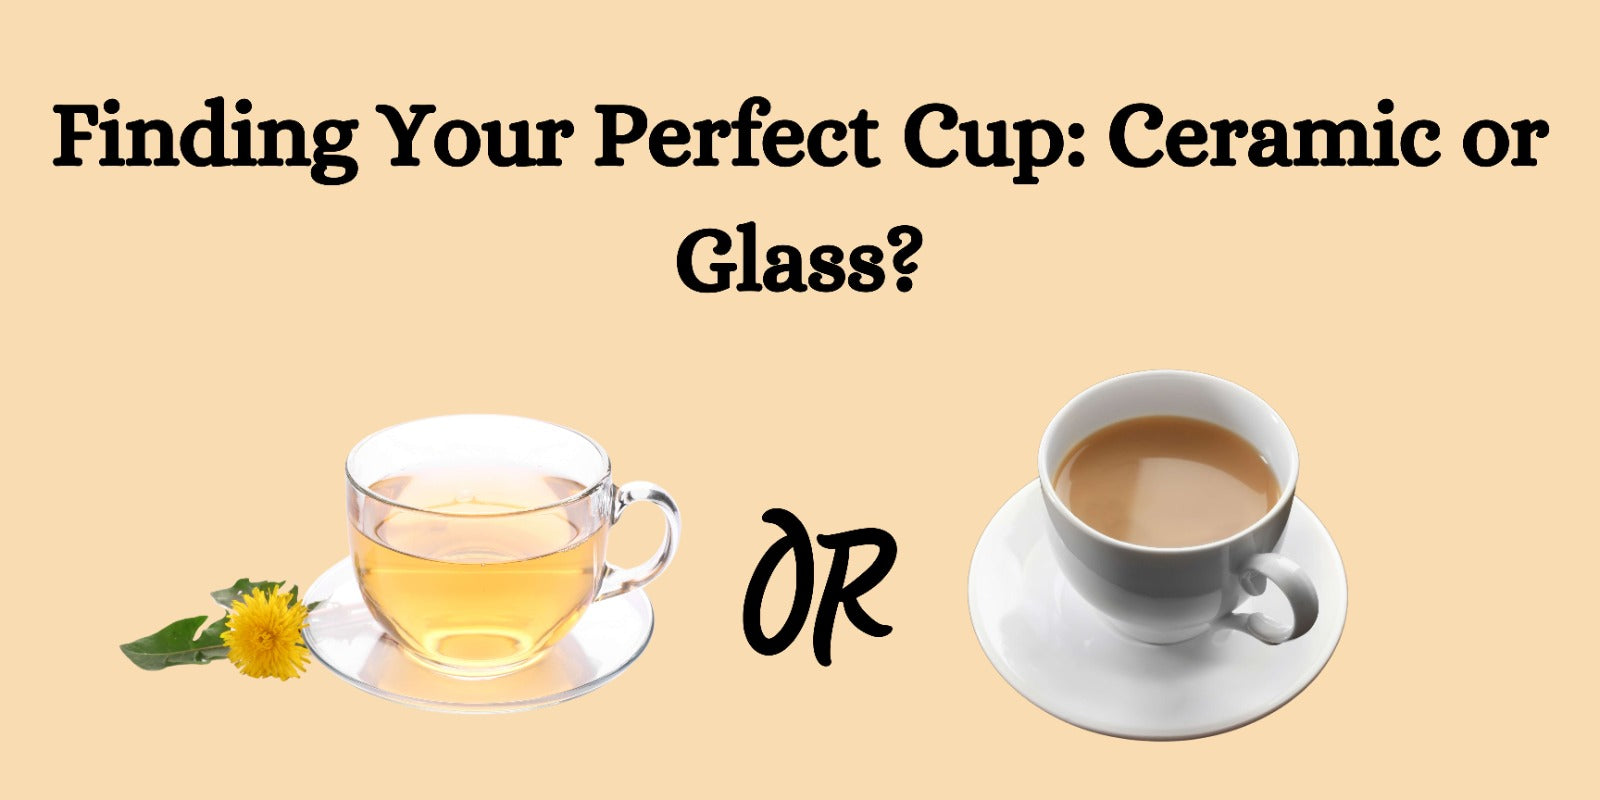 Finding Your Perfect Cup: Ceramic or Glass?